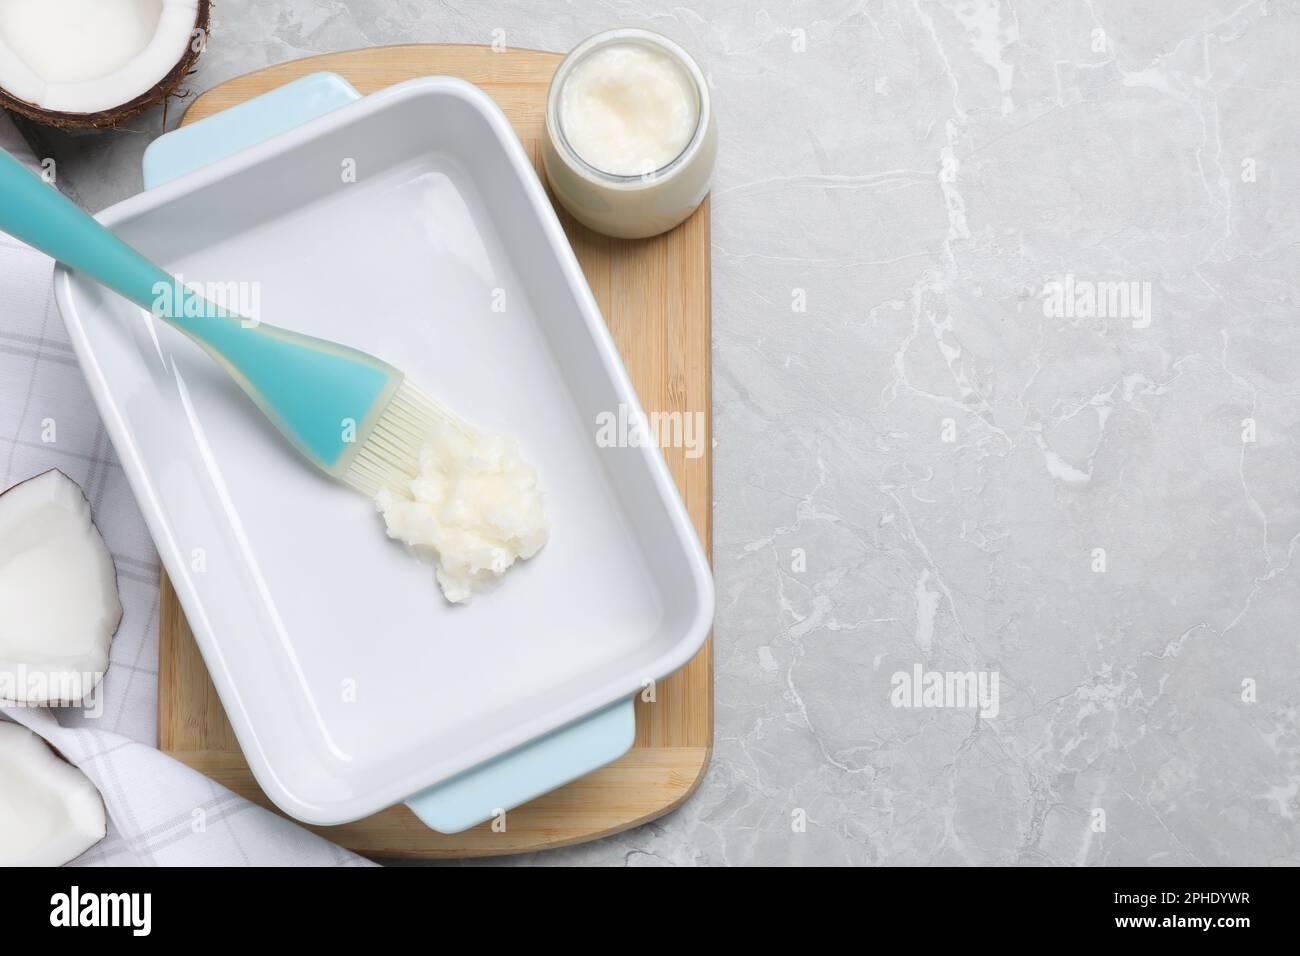 https://c8.alamy.com/comp/2PHDYWR/baking-dish-with-coconut-oil-and-silicone-brush-on-light-grey-table-flat-lay-space-for-text-2PHDYWR.jpg